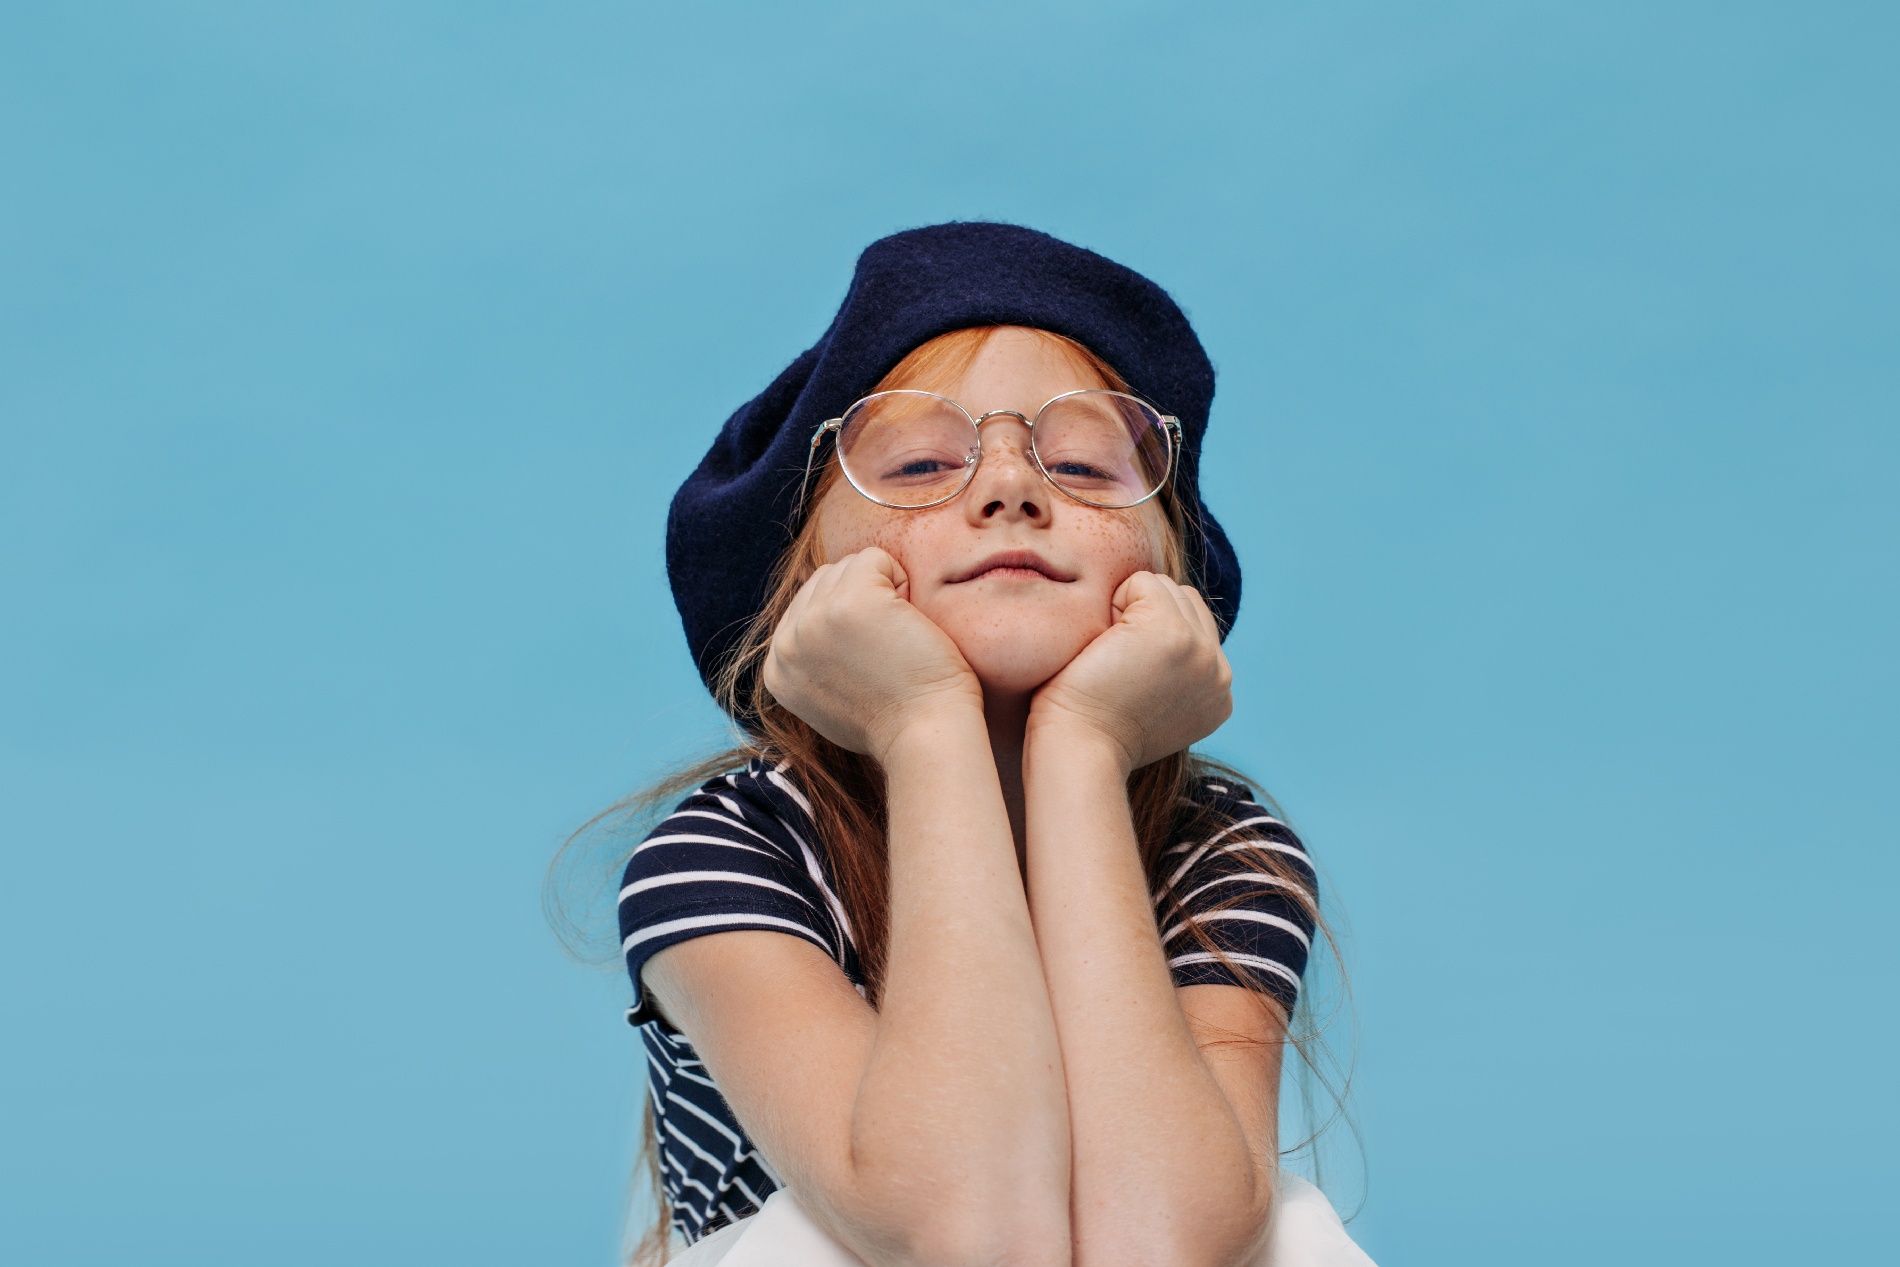 clever-little-girl-with-freckles-stylish-hat-clear-glasses-posing-looking-front-blue-isolated-wall-1